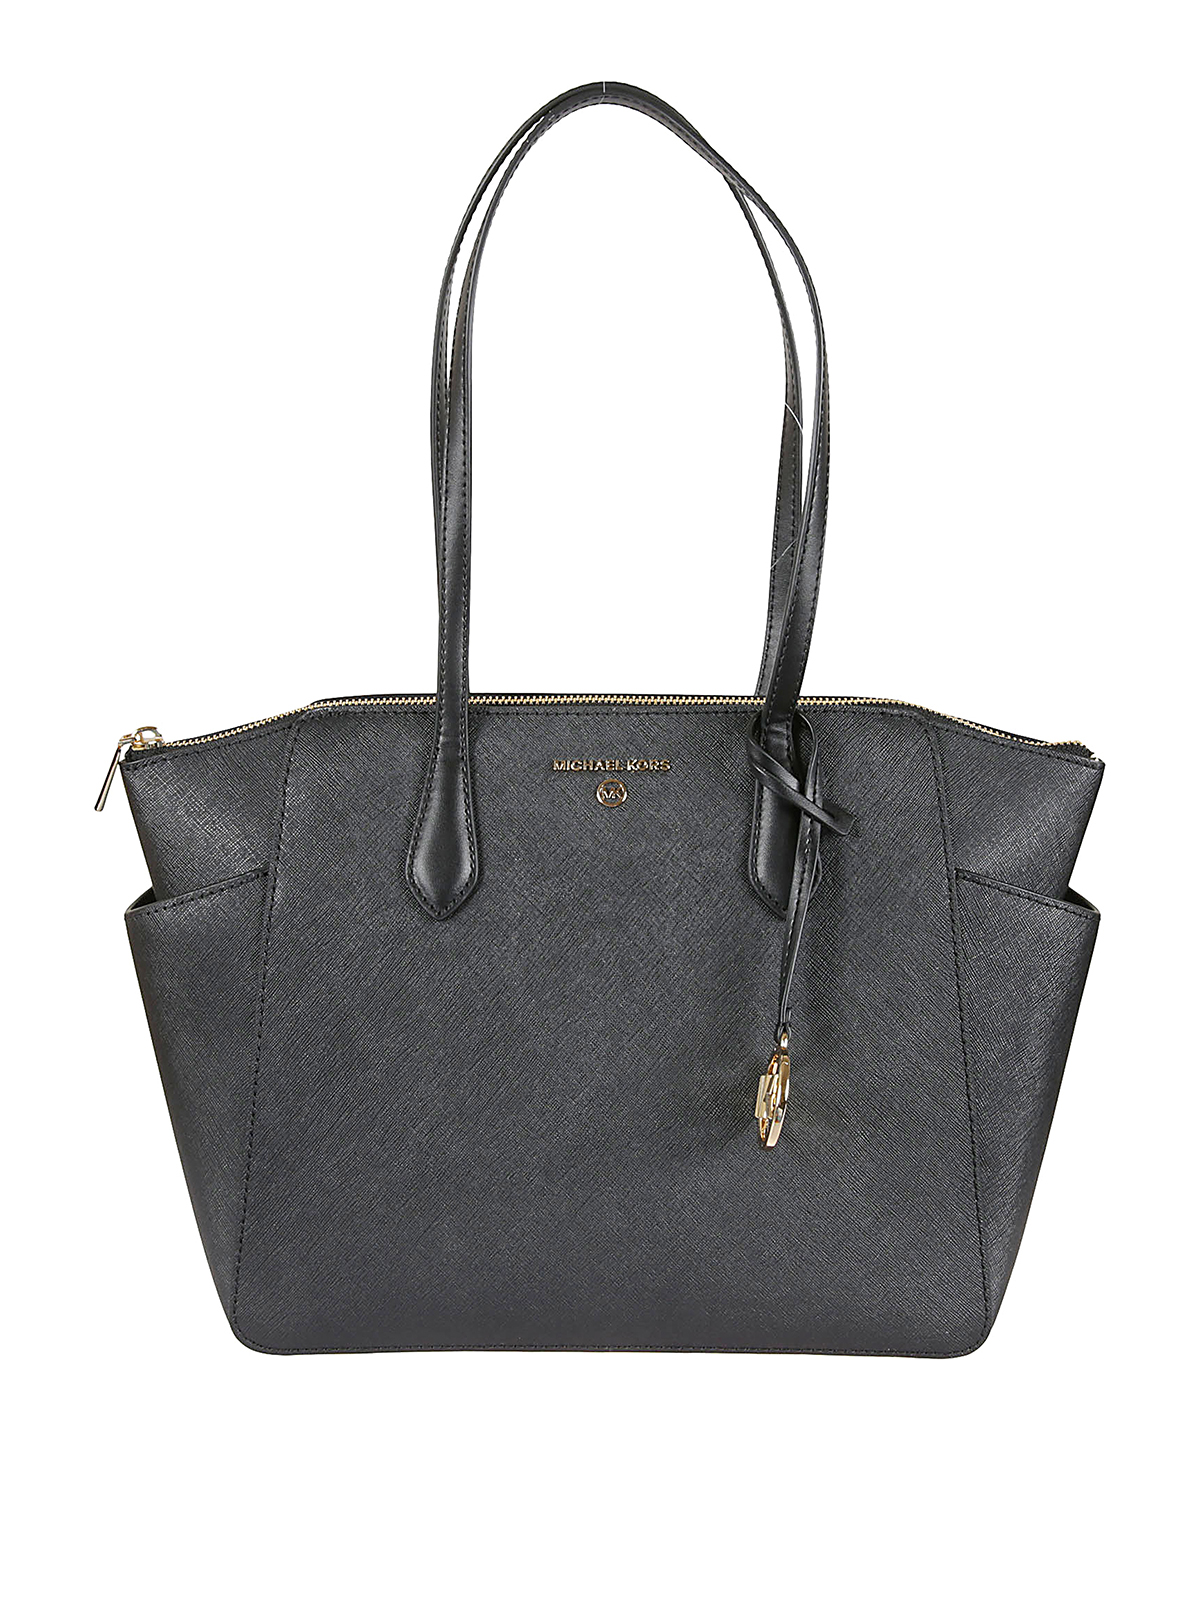 Michael Kors Marilyn Saffiano Leather Tote Bag In Negro